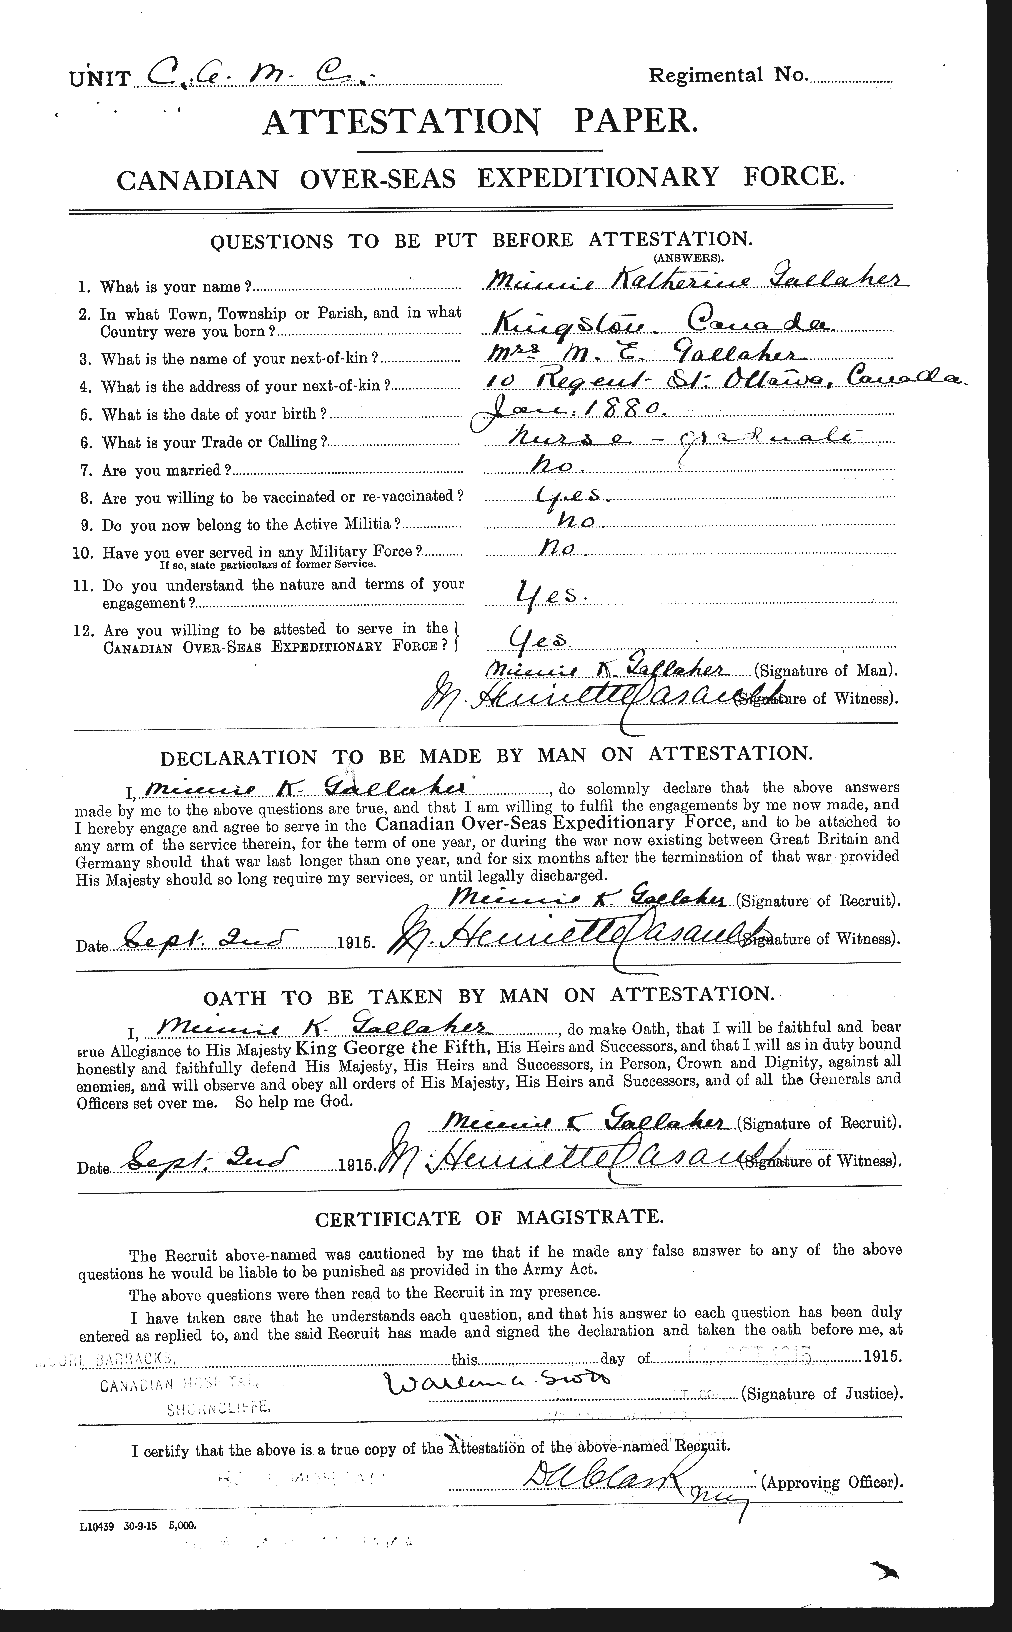 Personnel Records of the First World War - CEF 237293a